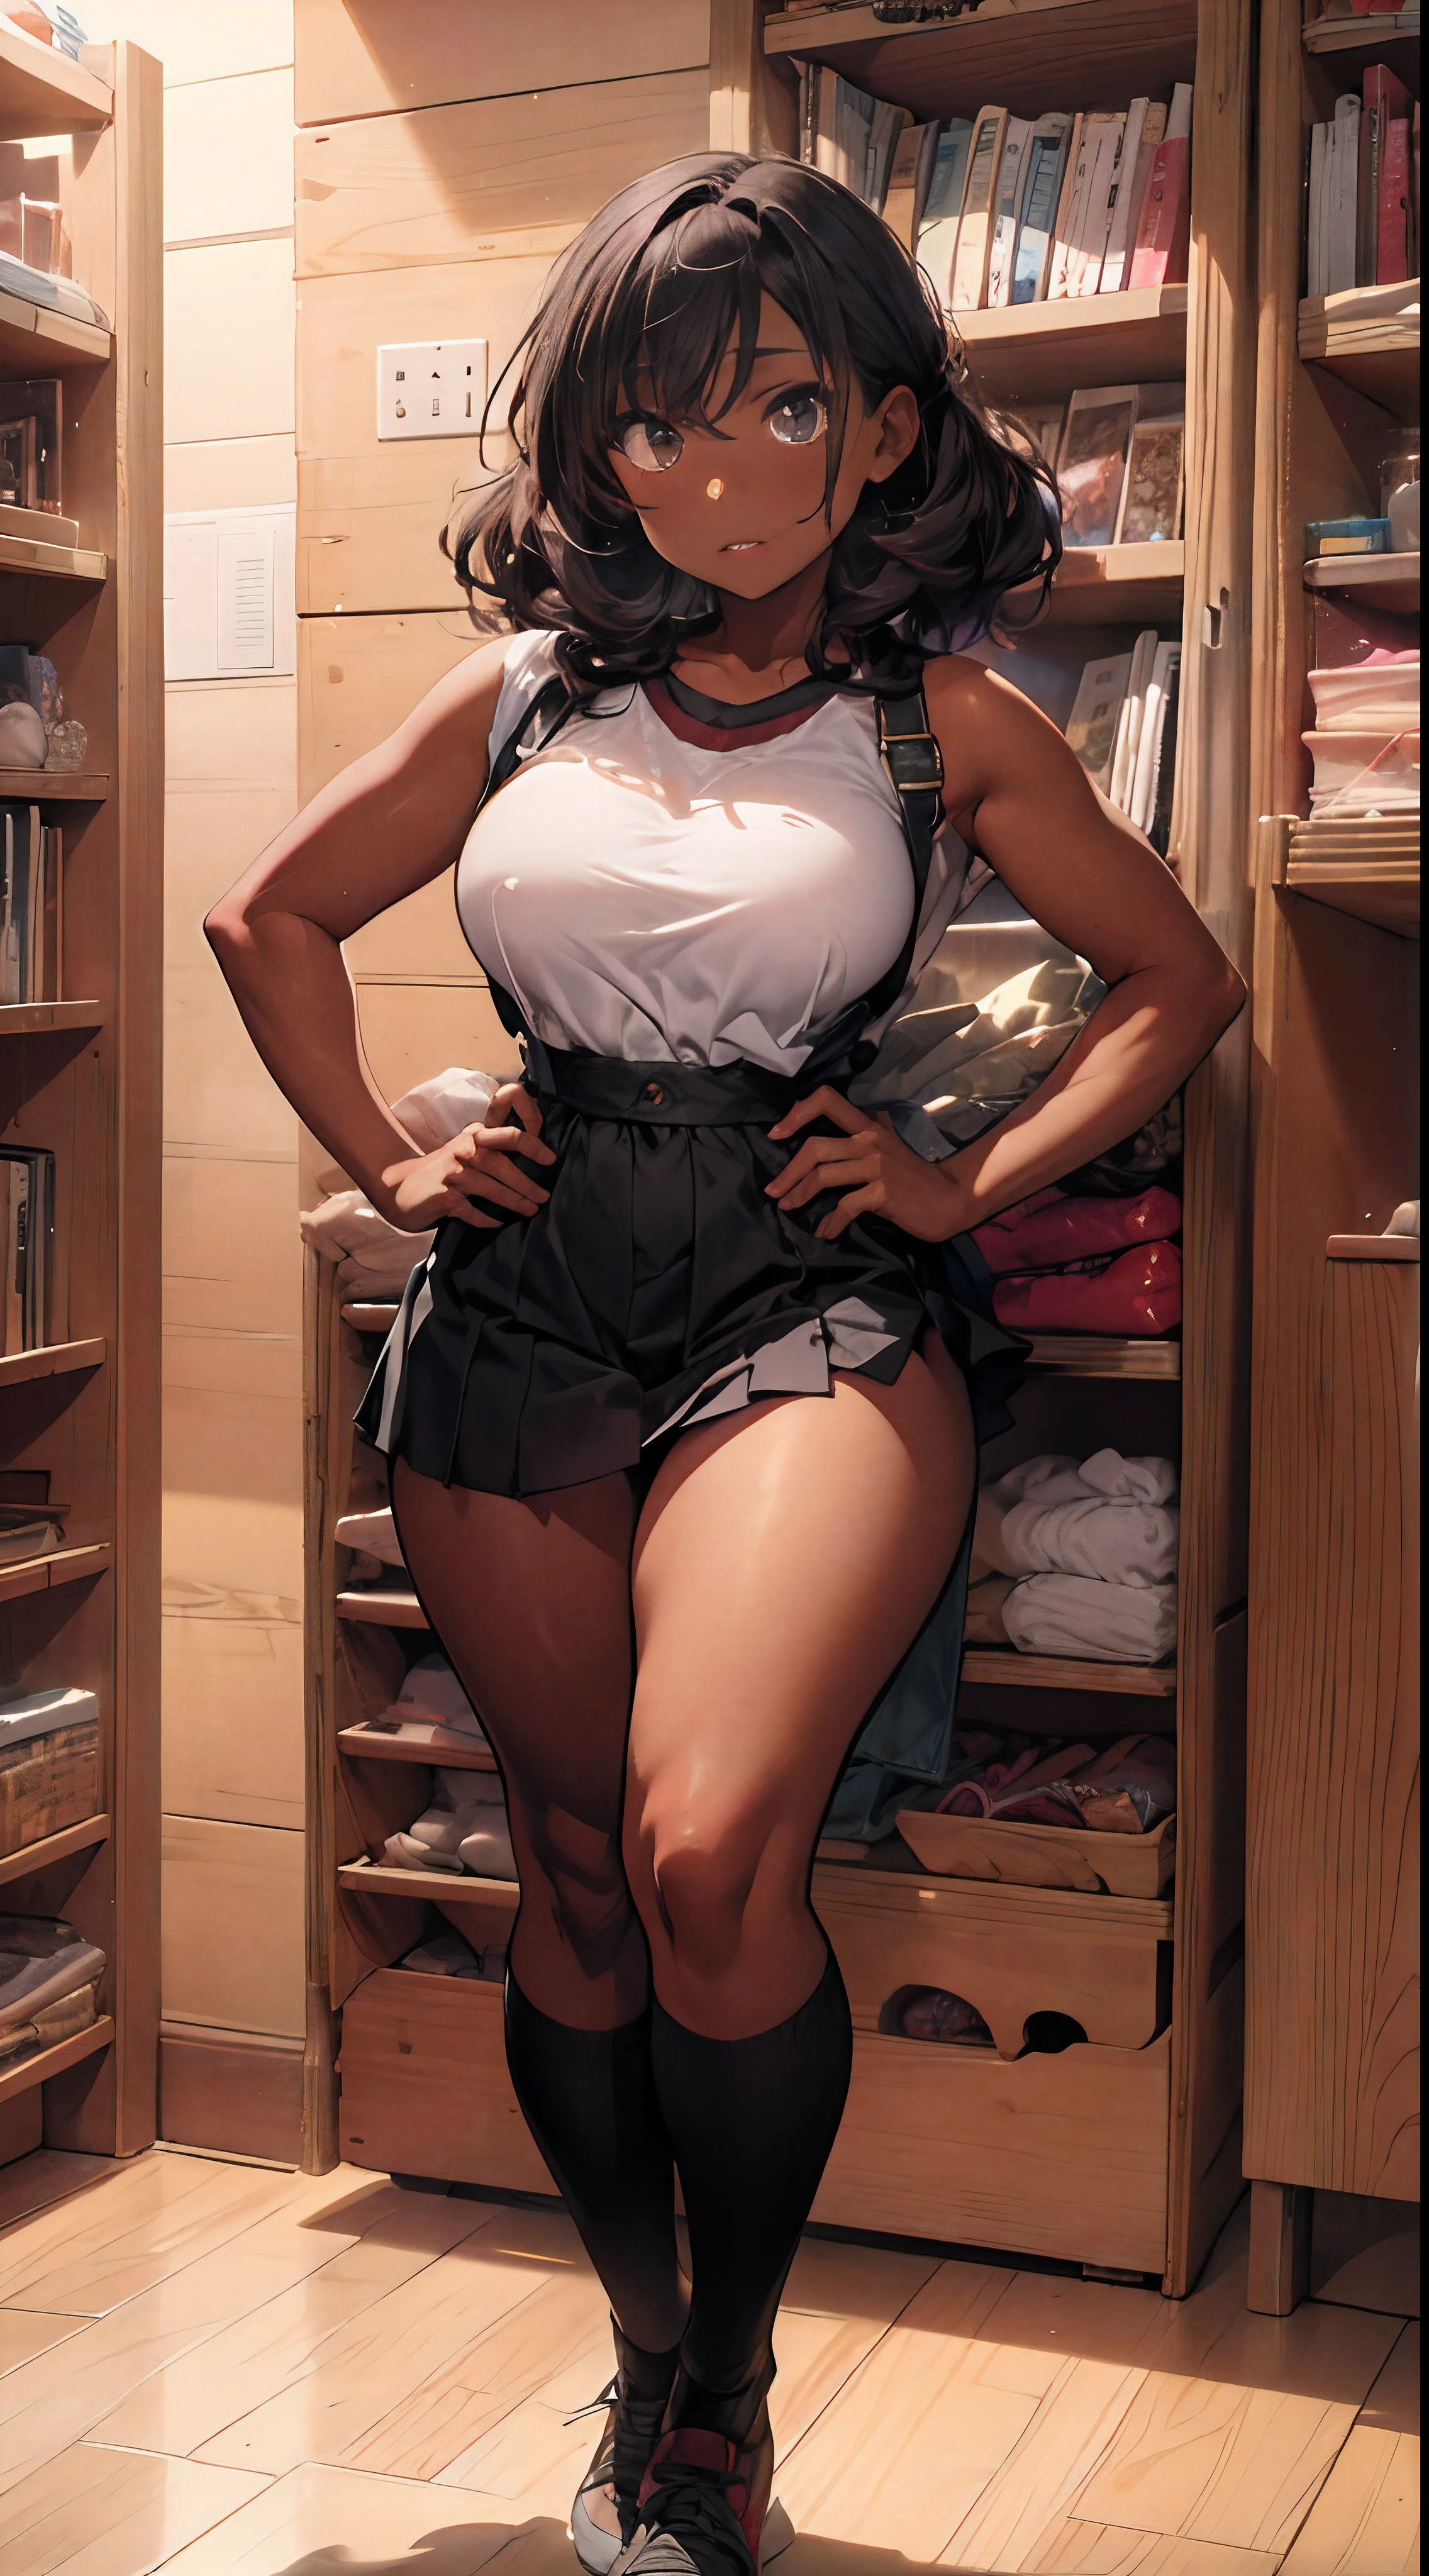 (((dark-skinned))), (bookworm, 25-year-old Mahagony-skinned,  darkskin statuesque oblong-shaped face,vivacious black eyes, prominently narrowed convex hooked nose, hourglass physique,thick, alluring, large breasts, large butt, heart hips, long, toned legs, messy pixie bun, glasses,  sweater dress, high definition, 96k, fullbody, risky, vivd,Graffiti graphic novel, digital masterpiece,) (sultry and strong,beautiful, toned, Golden Ratio physique ((mystifying Ultra Detailed Iris,))  Extremely Detailed Body and Wide Hips. The character should have intricately accurate facial and physical structure* intricately realistic expression and emotion* accurate colored complexion* accurate clothing design* complex hairstyles* and intricate character detail. Human realistic features) ::10  (, sensual energetic atomsphere, perfect prompt, perfect prose, Unreal Engine 5, Cinema, Ultra wide angle, Depth of field, Hyper detail, Fine details, Fabric texture, erotica,, Depth of field, Tilt blur, white balance, k , super resolution, megapixel, VR, single, good, ambient light, half light, backlight, natural light, incandescent light, optical fiber, dark light, cinematic light, studio light, soft light, ambient light, contrast light, beautiful light, accent light, general lighting, screen space general illumination, ray traced global illumination, optics, diffuse , Glow, Shadows, Rough, Glow, Raytraced Reflections, Clearance Reflections, Screen Space Reflections, Diffractive Gradation, Chromatic Aberration, GB ent Offset, Sweep Lines, Ray Tracing, Ambient Light Occlusion,Anti-Aliasing, FKAA, TXAA, RTX, SSAO, MSAAx4, shaders, OpenGL shaders, GLSL shaders, post-processing, post-processing, cell shading, tone mapping, CG, visual effects, sound effects, incredibly detailed and complex, hyper-maximal, elegant, hyper-realistic, super-detailed, dynamic pose)))